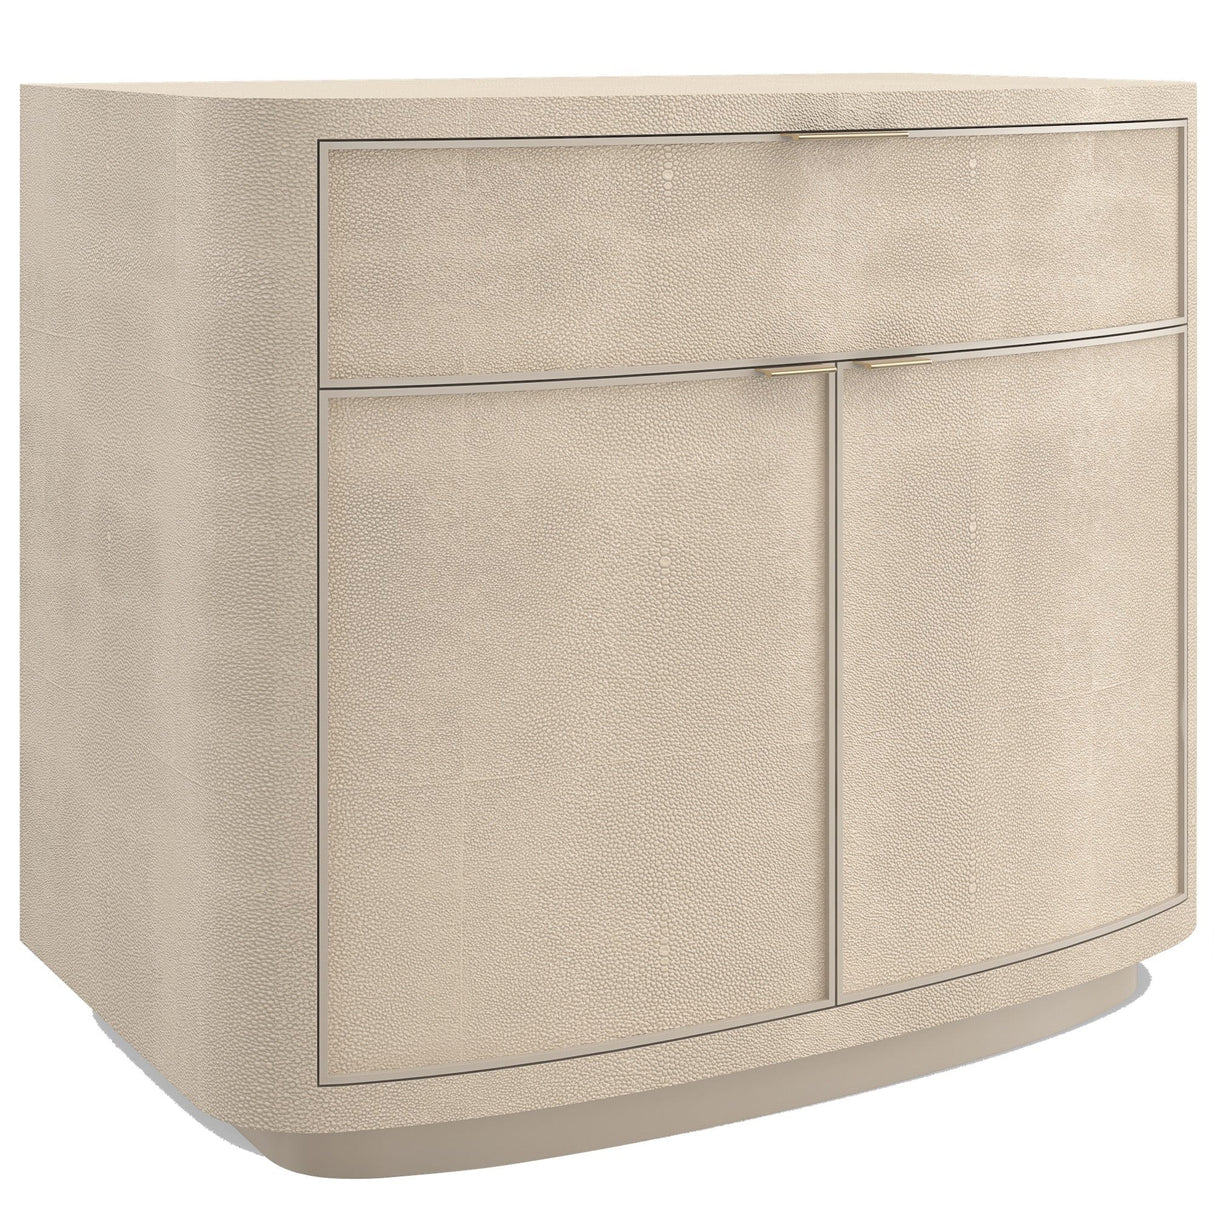 Caracole Simply Perfect Nightstand Nightstands caracole-CLA-022-063